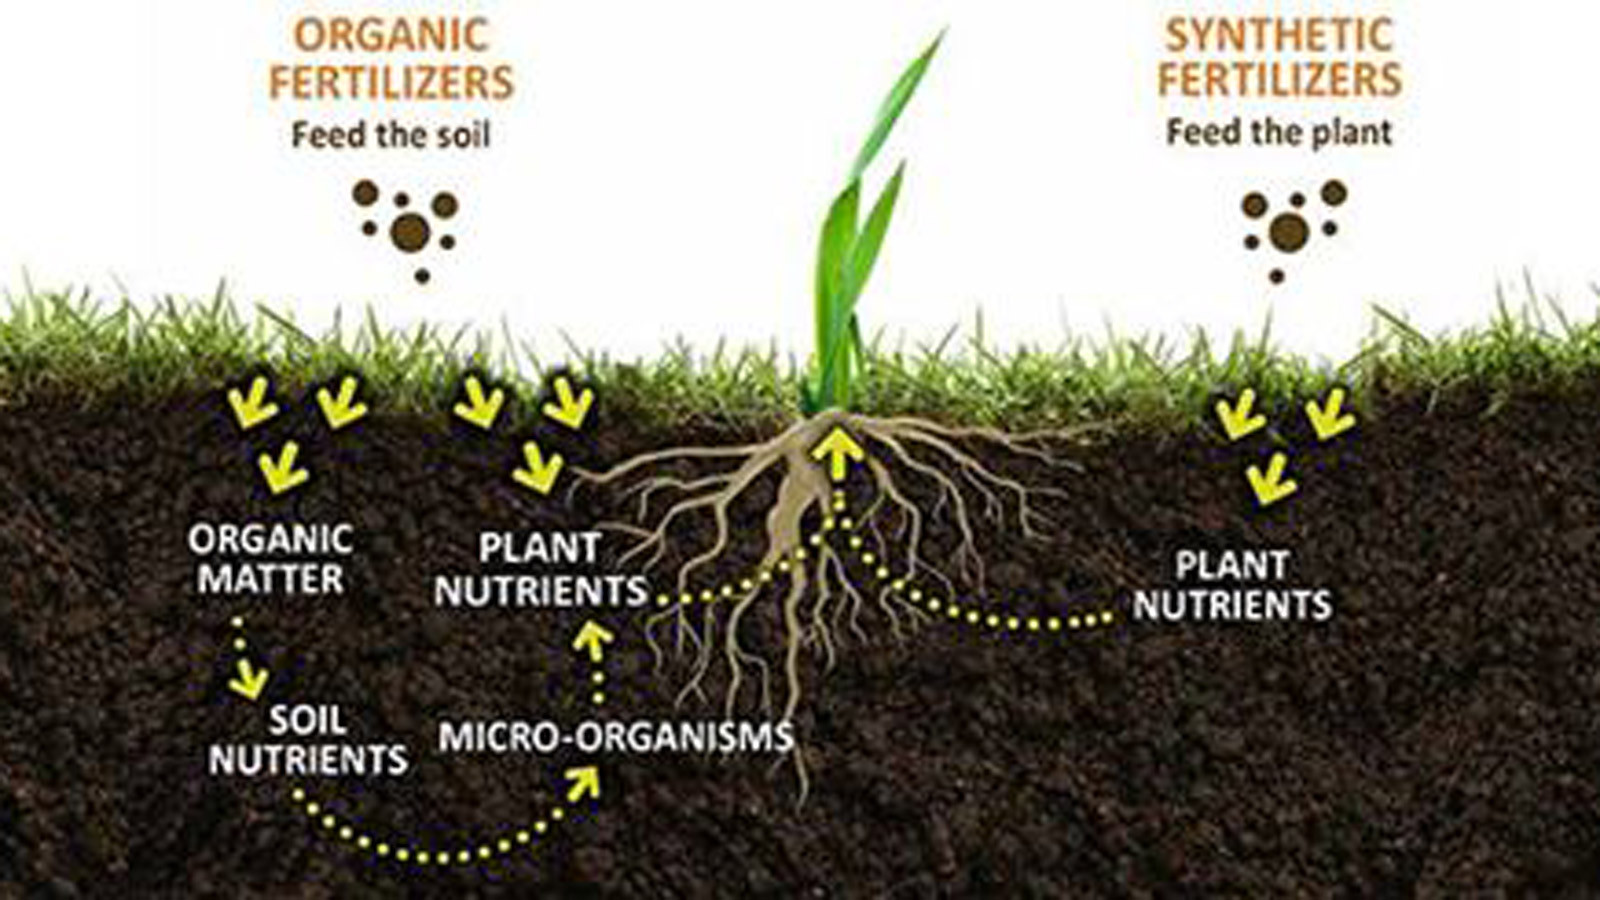 Organic land care vs synthetic land care Chart